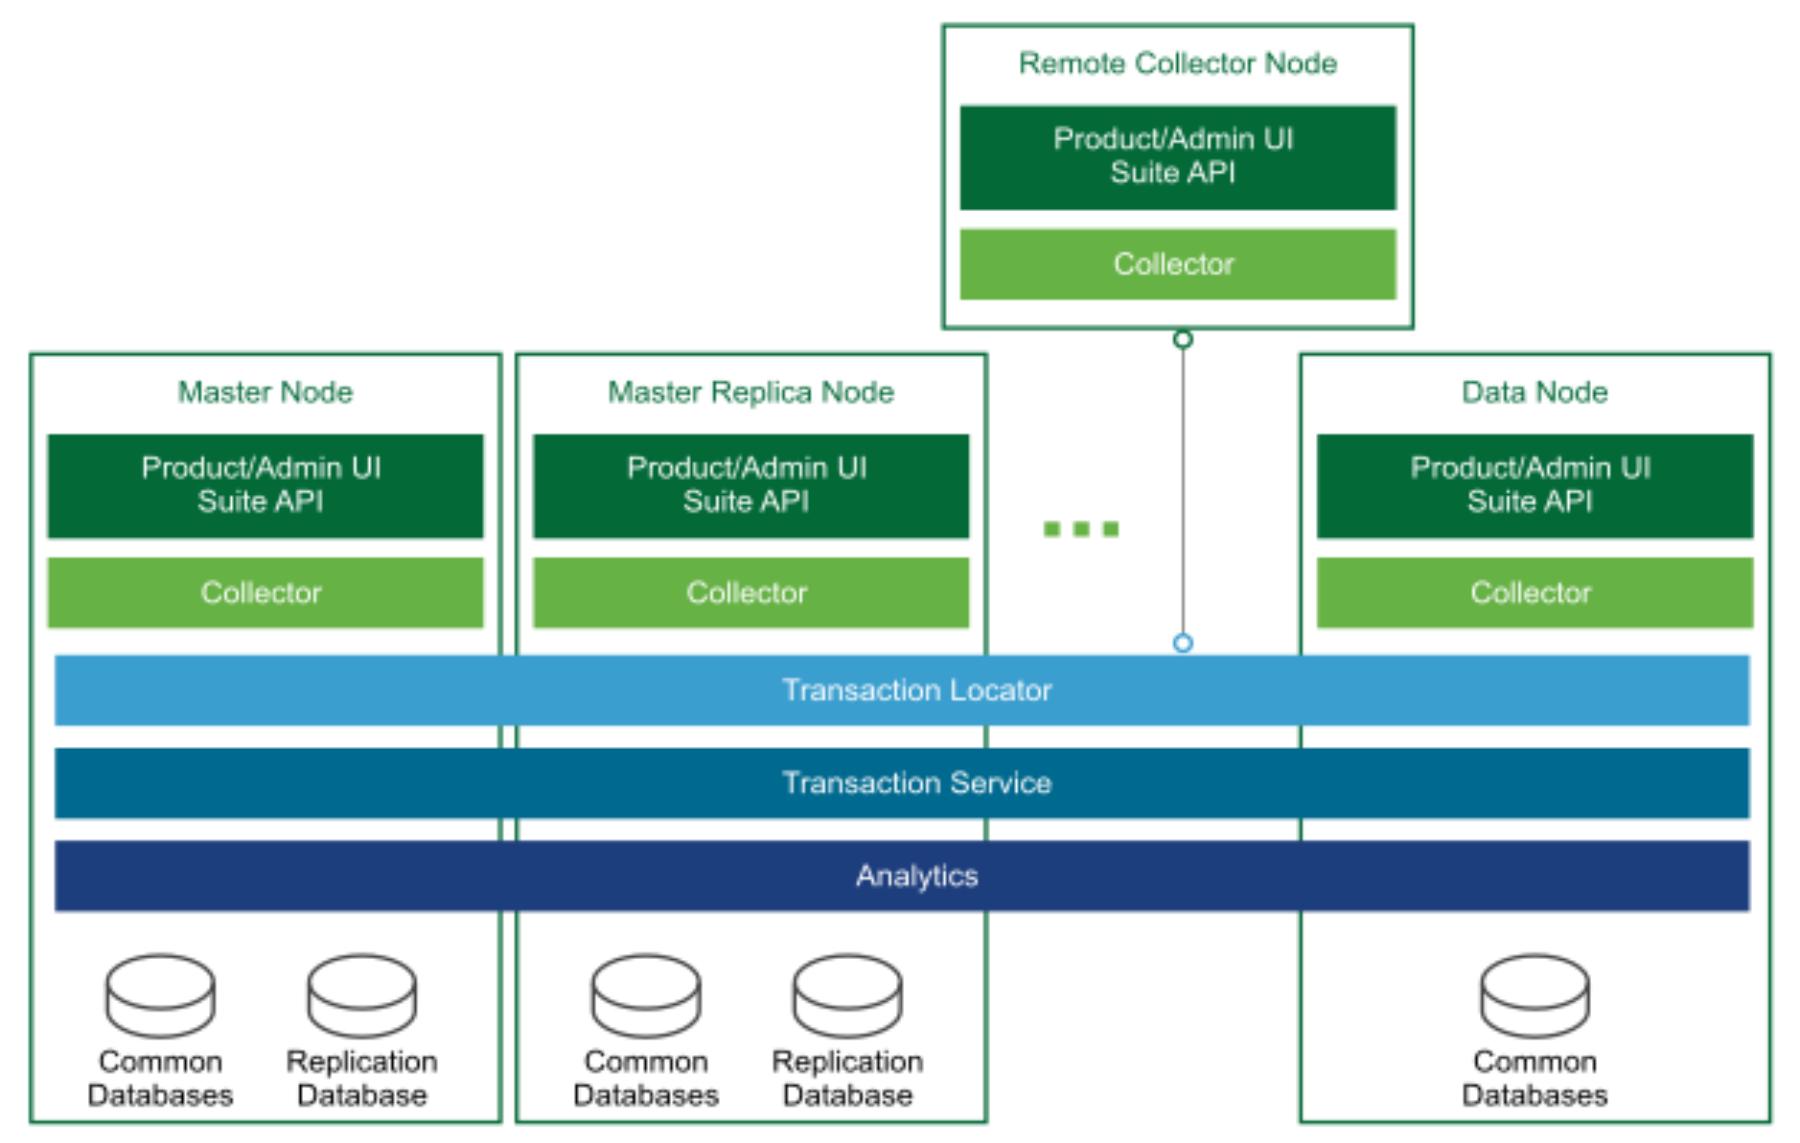 The high-level architecture of a vRealize Operations Manager deployment includes a master node, master replica node, data node, and remote collector.